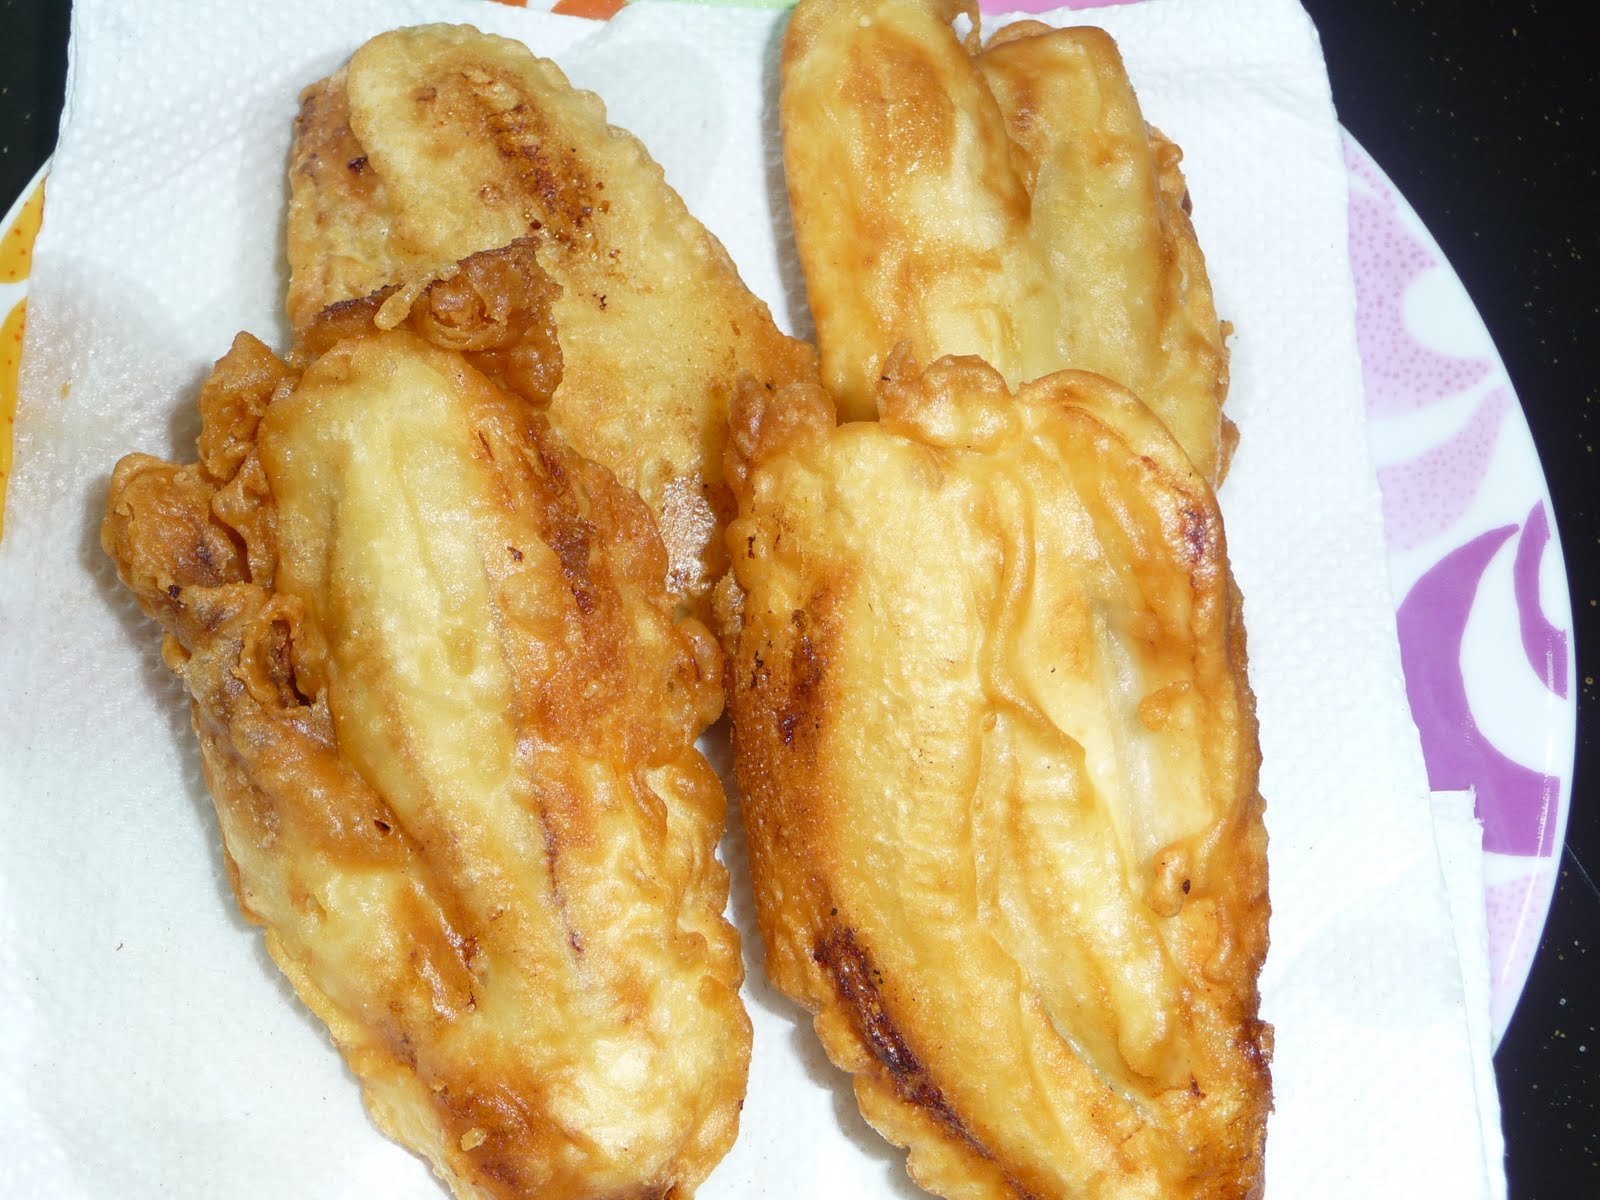 Milee's Kitchen Goreng Pisang and friends